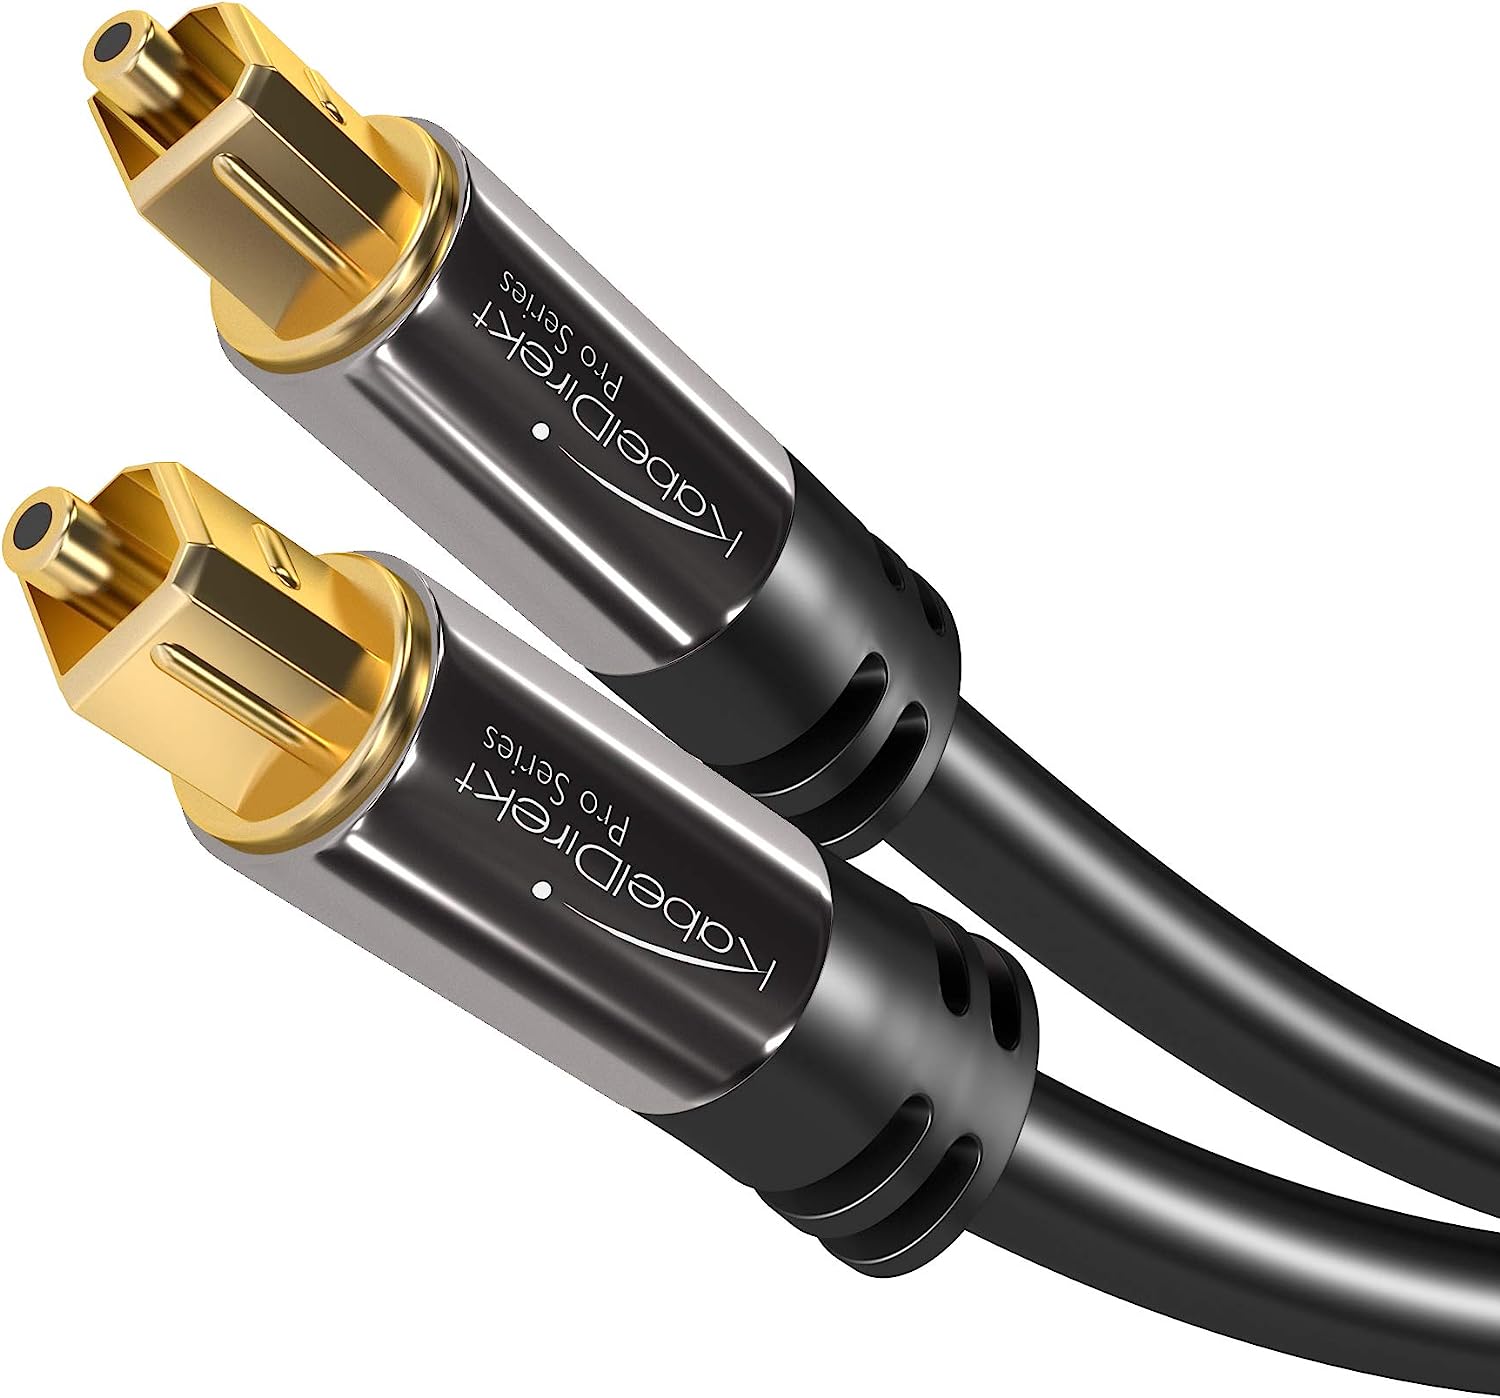 TOSLINK cable, optical audio cable – 6 feet short [...]